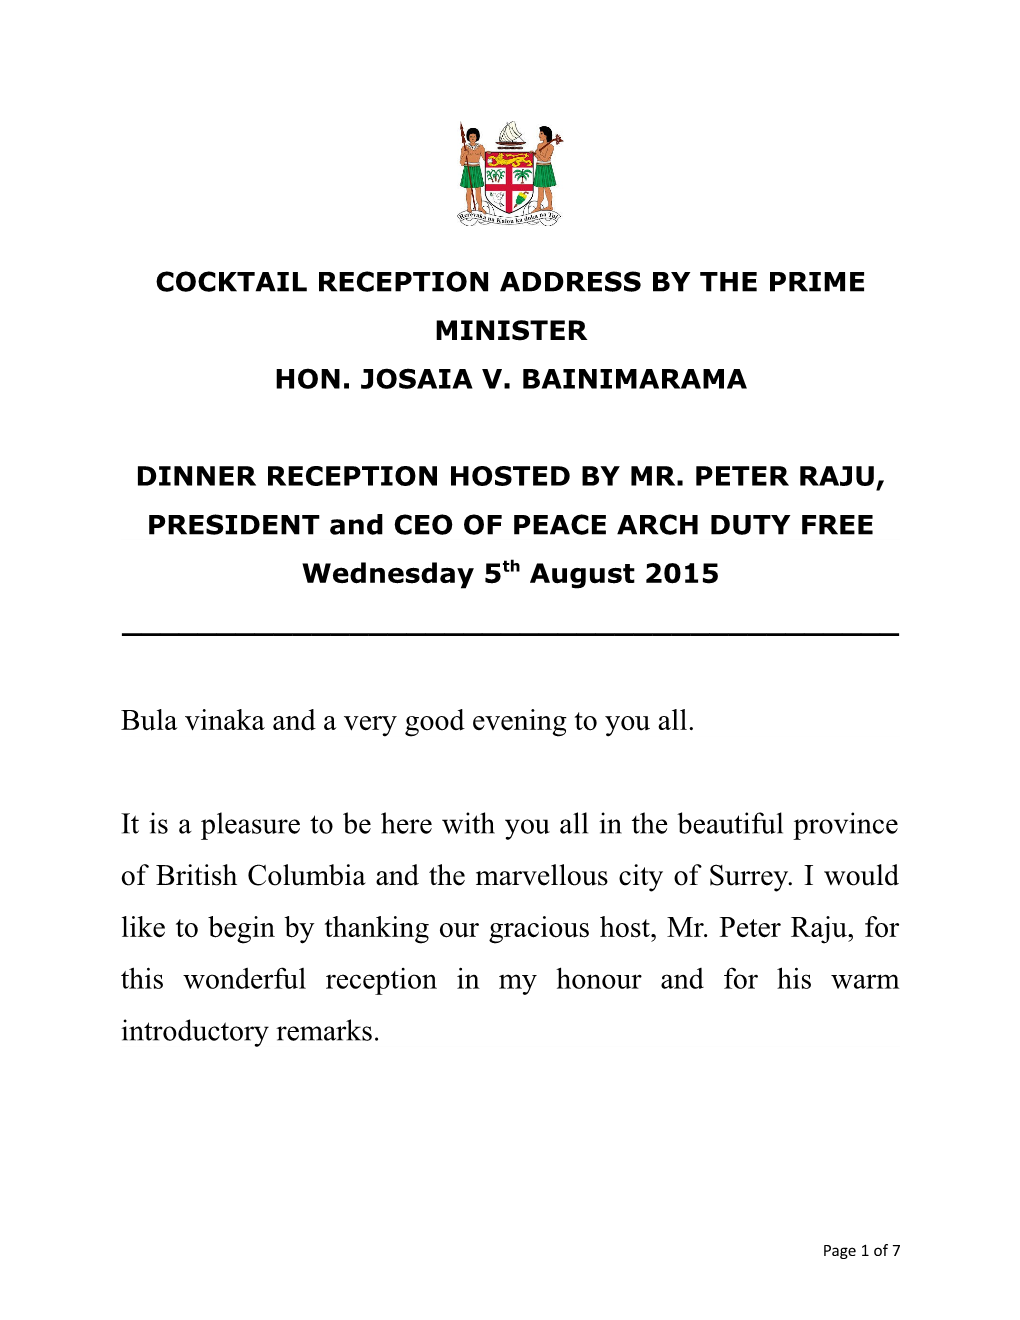 Cocktail Reception Address by the Prime Minister